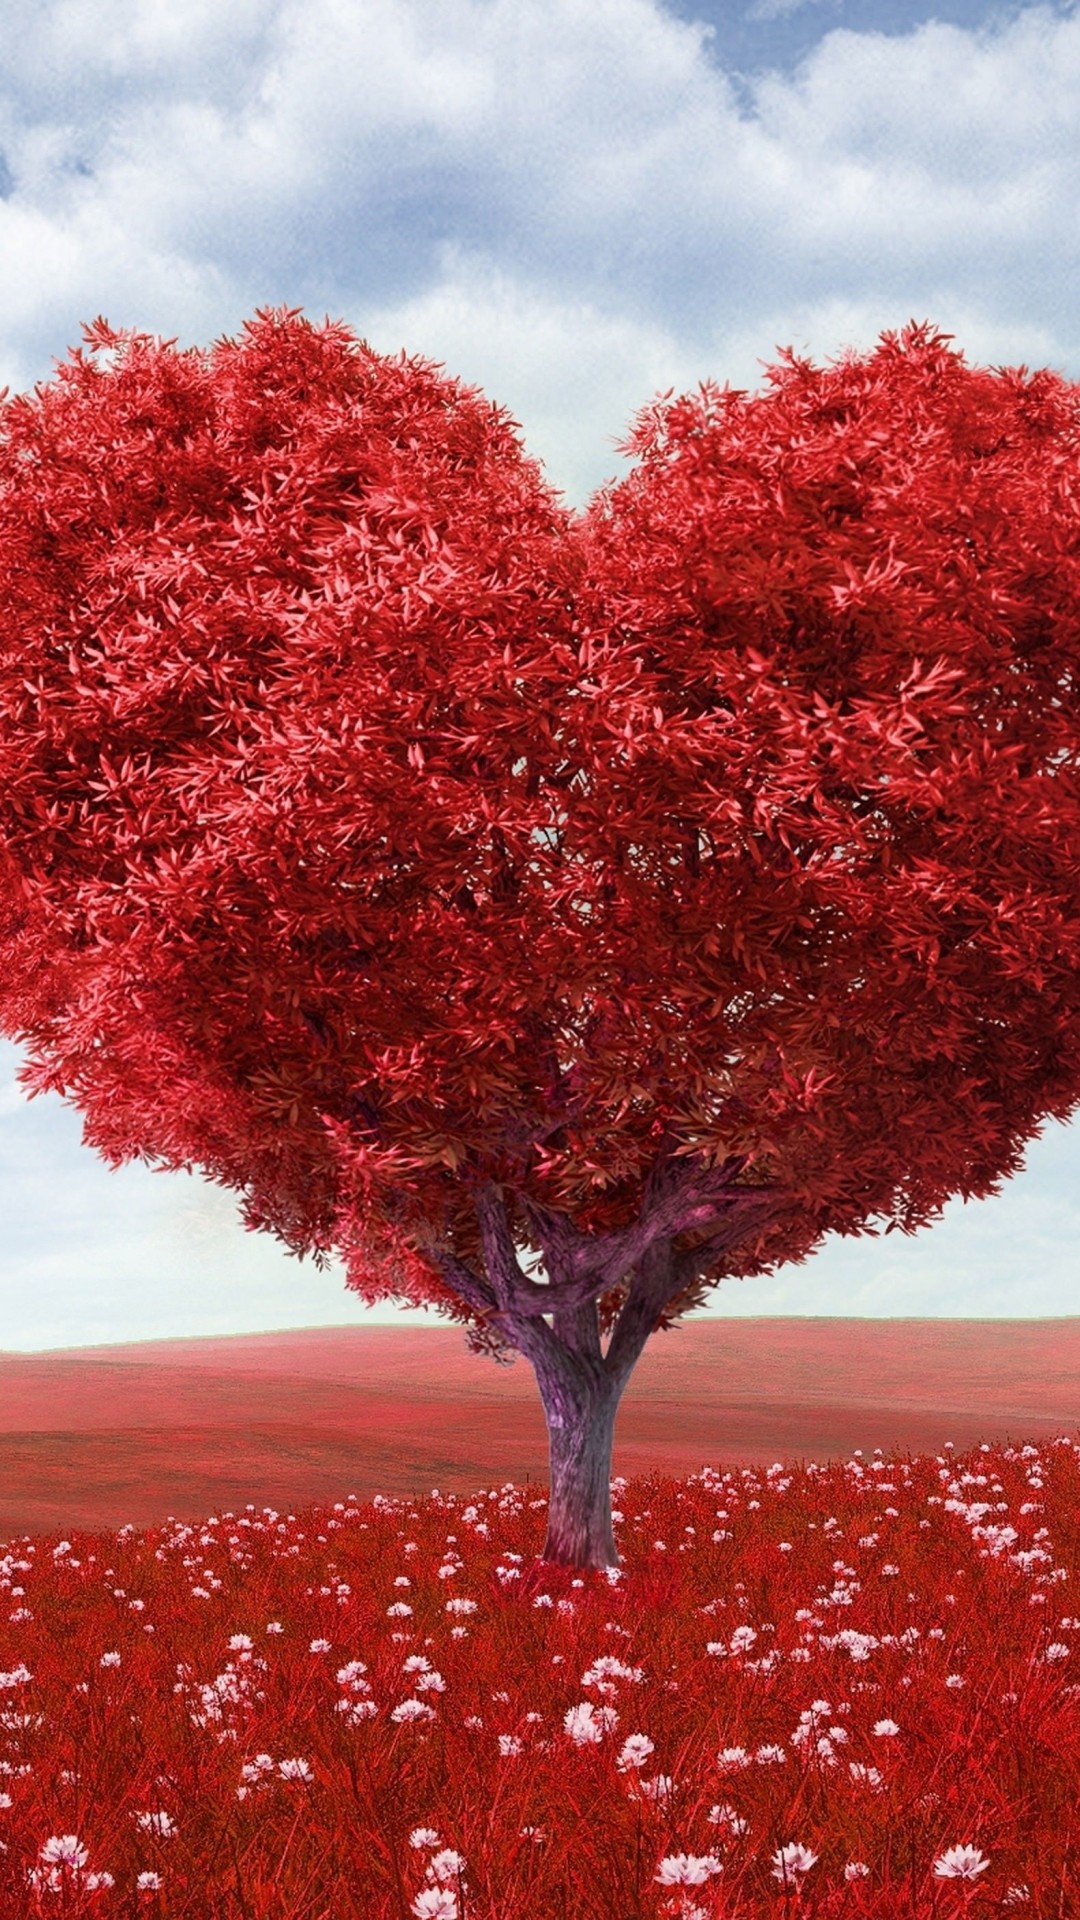 The Tree Of Love Wallpaper for SAMSUNG Galaxy S5